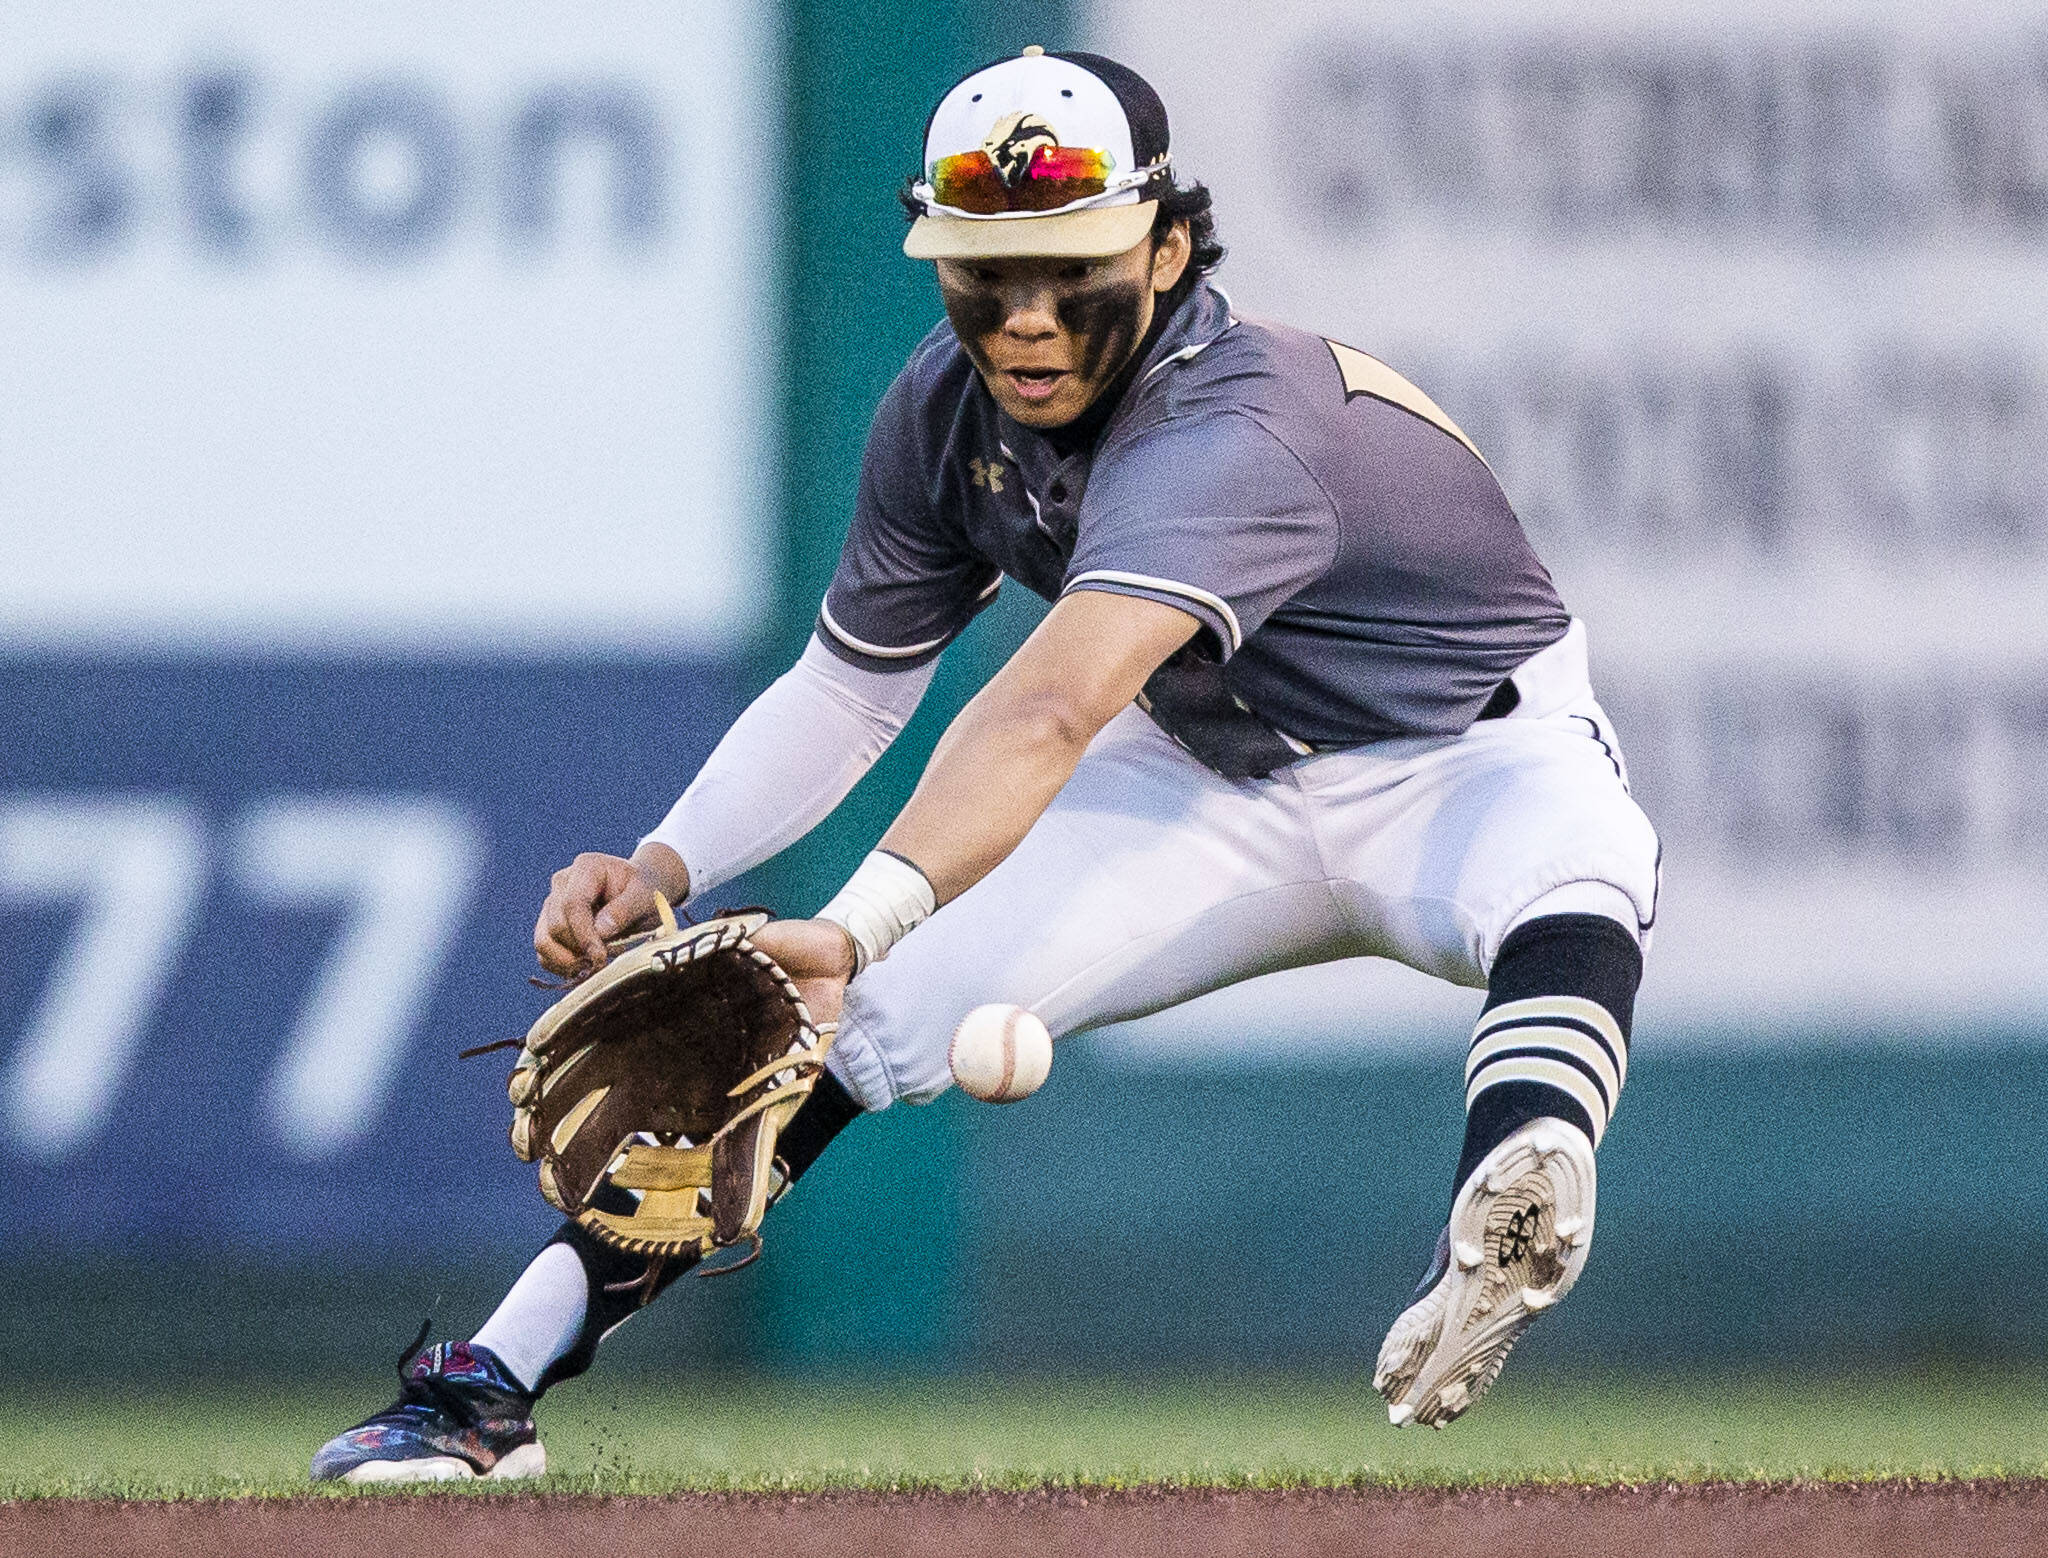 Lynnwood’s Leyon Camantigue stops a ground ball hit past second base during the district semifinal game at Funko Field on Tuesday, May 10, 2022 in Everett, Washington. (Olivia Vanni / The Herald)